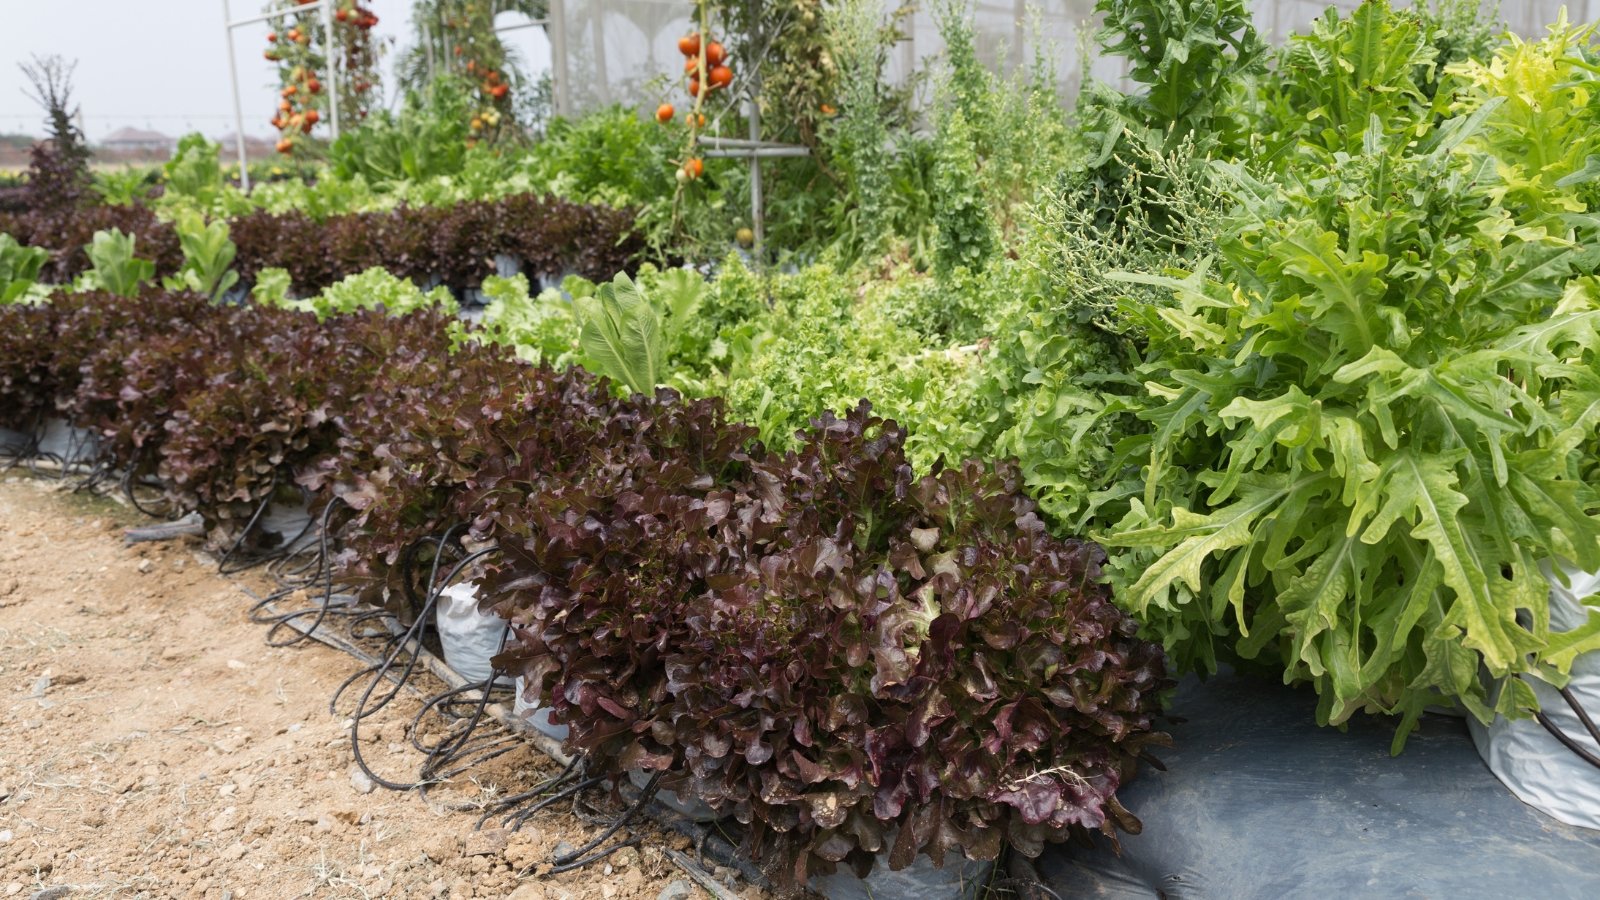 Green and deep purple leafy vegetables contrast against the backdrop of sprawling tomato vines, creating a colorful and lush garden scene bursting with natural diversity.